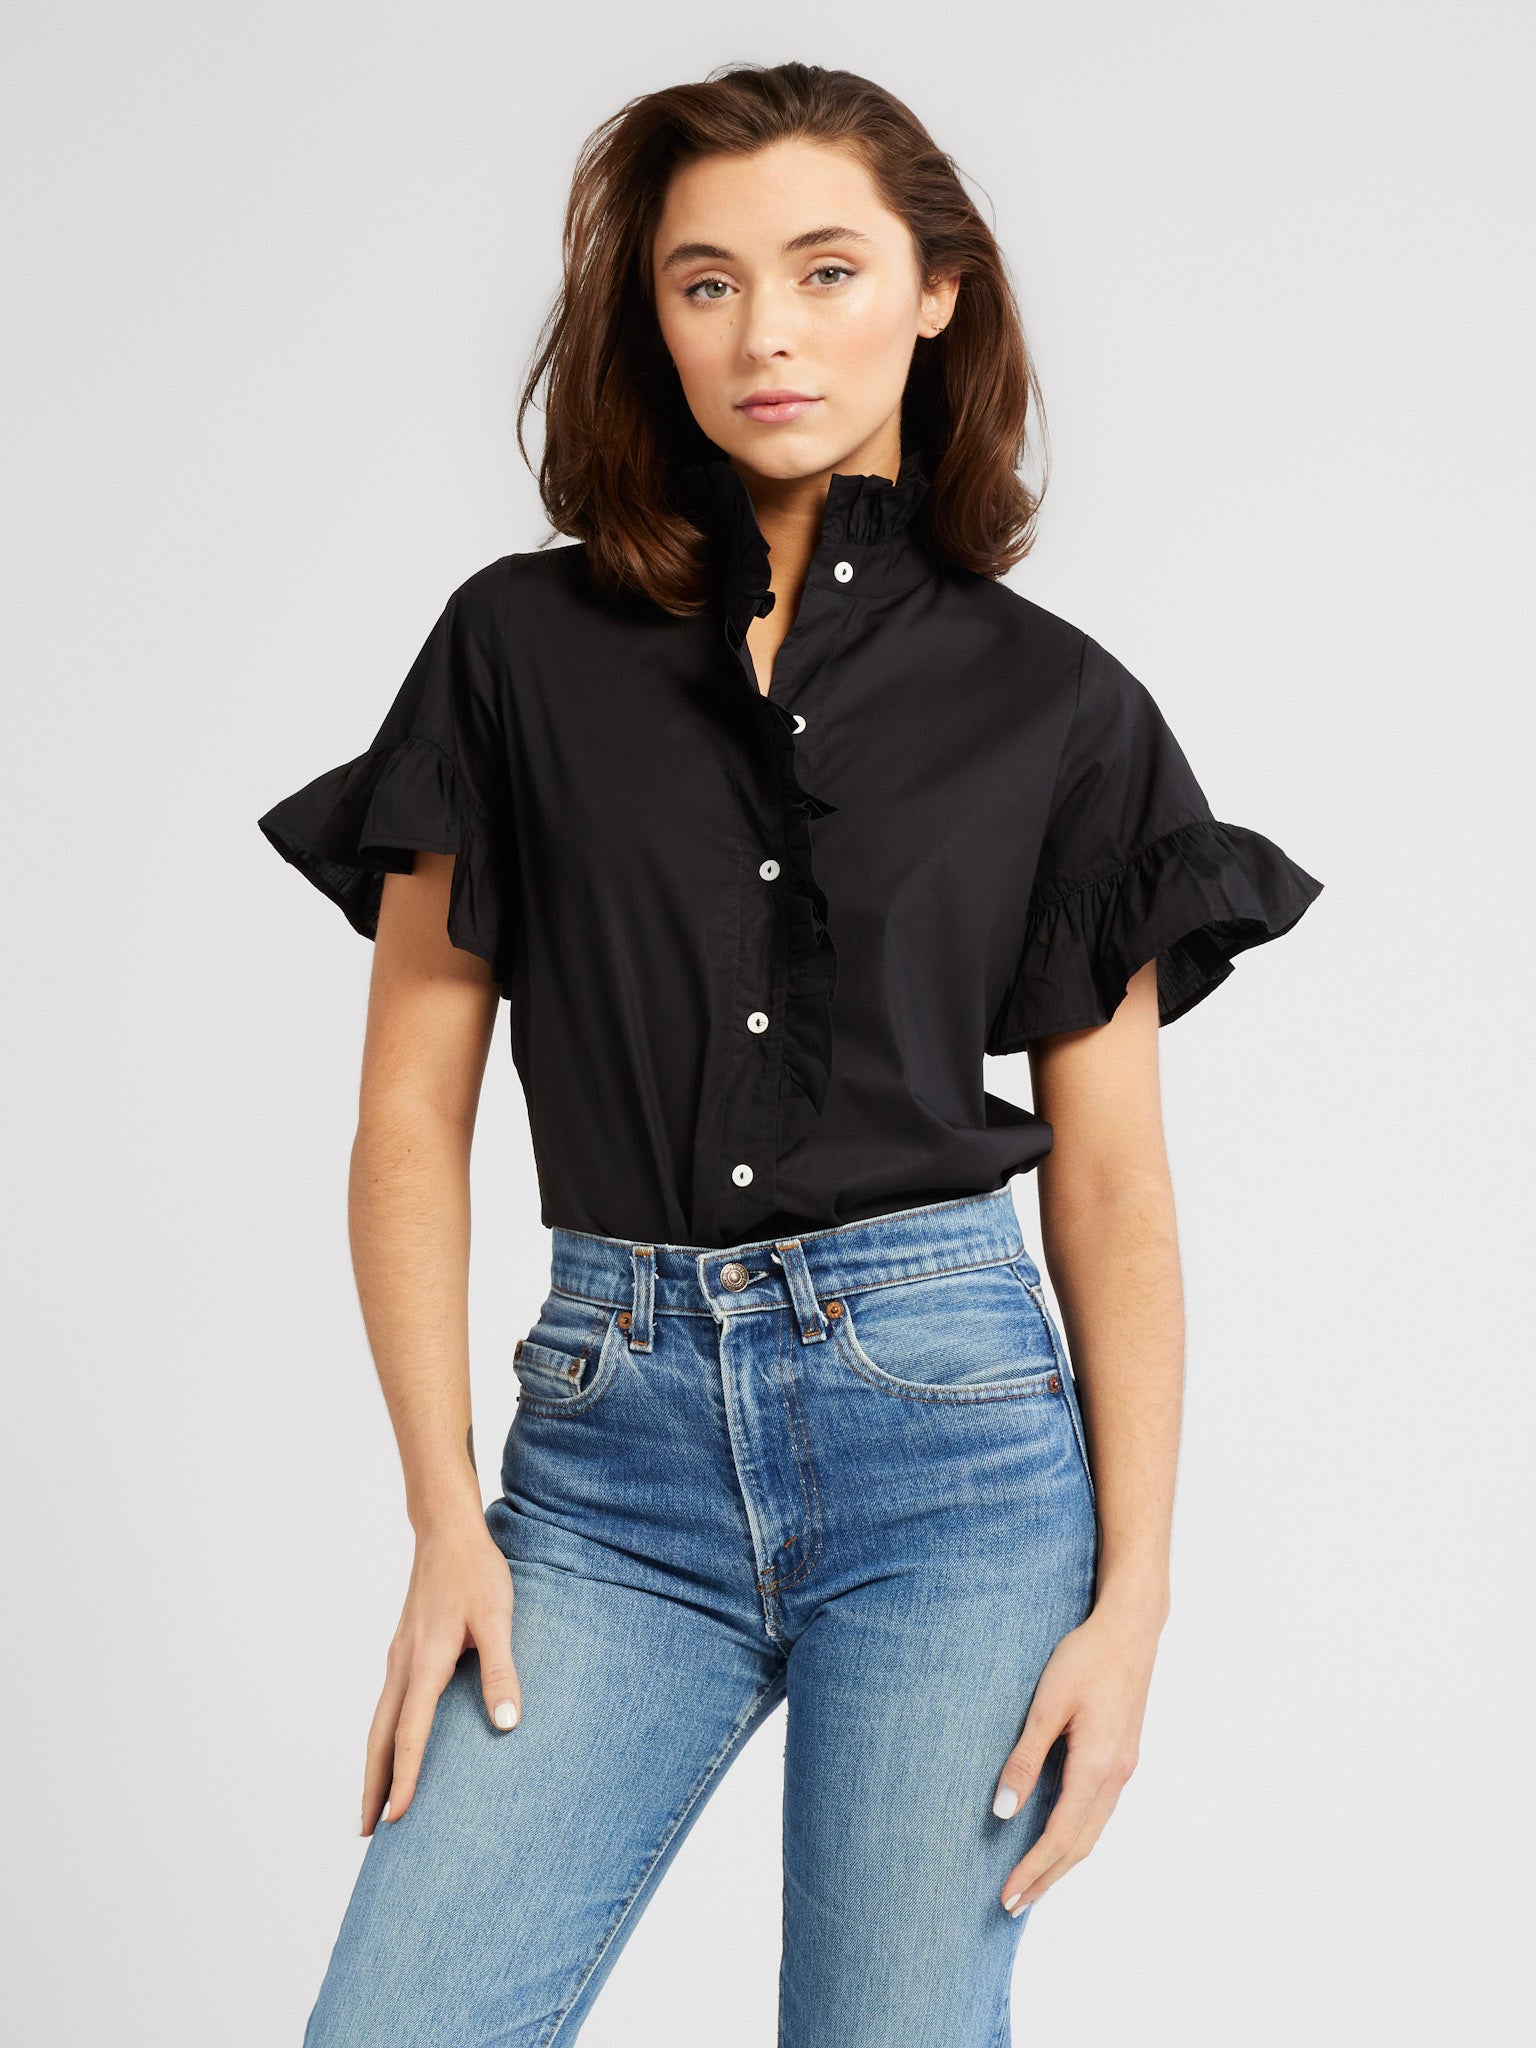 MILLE Clothing Vanessa Top in Black